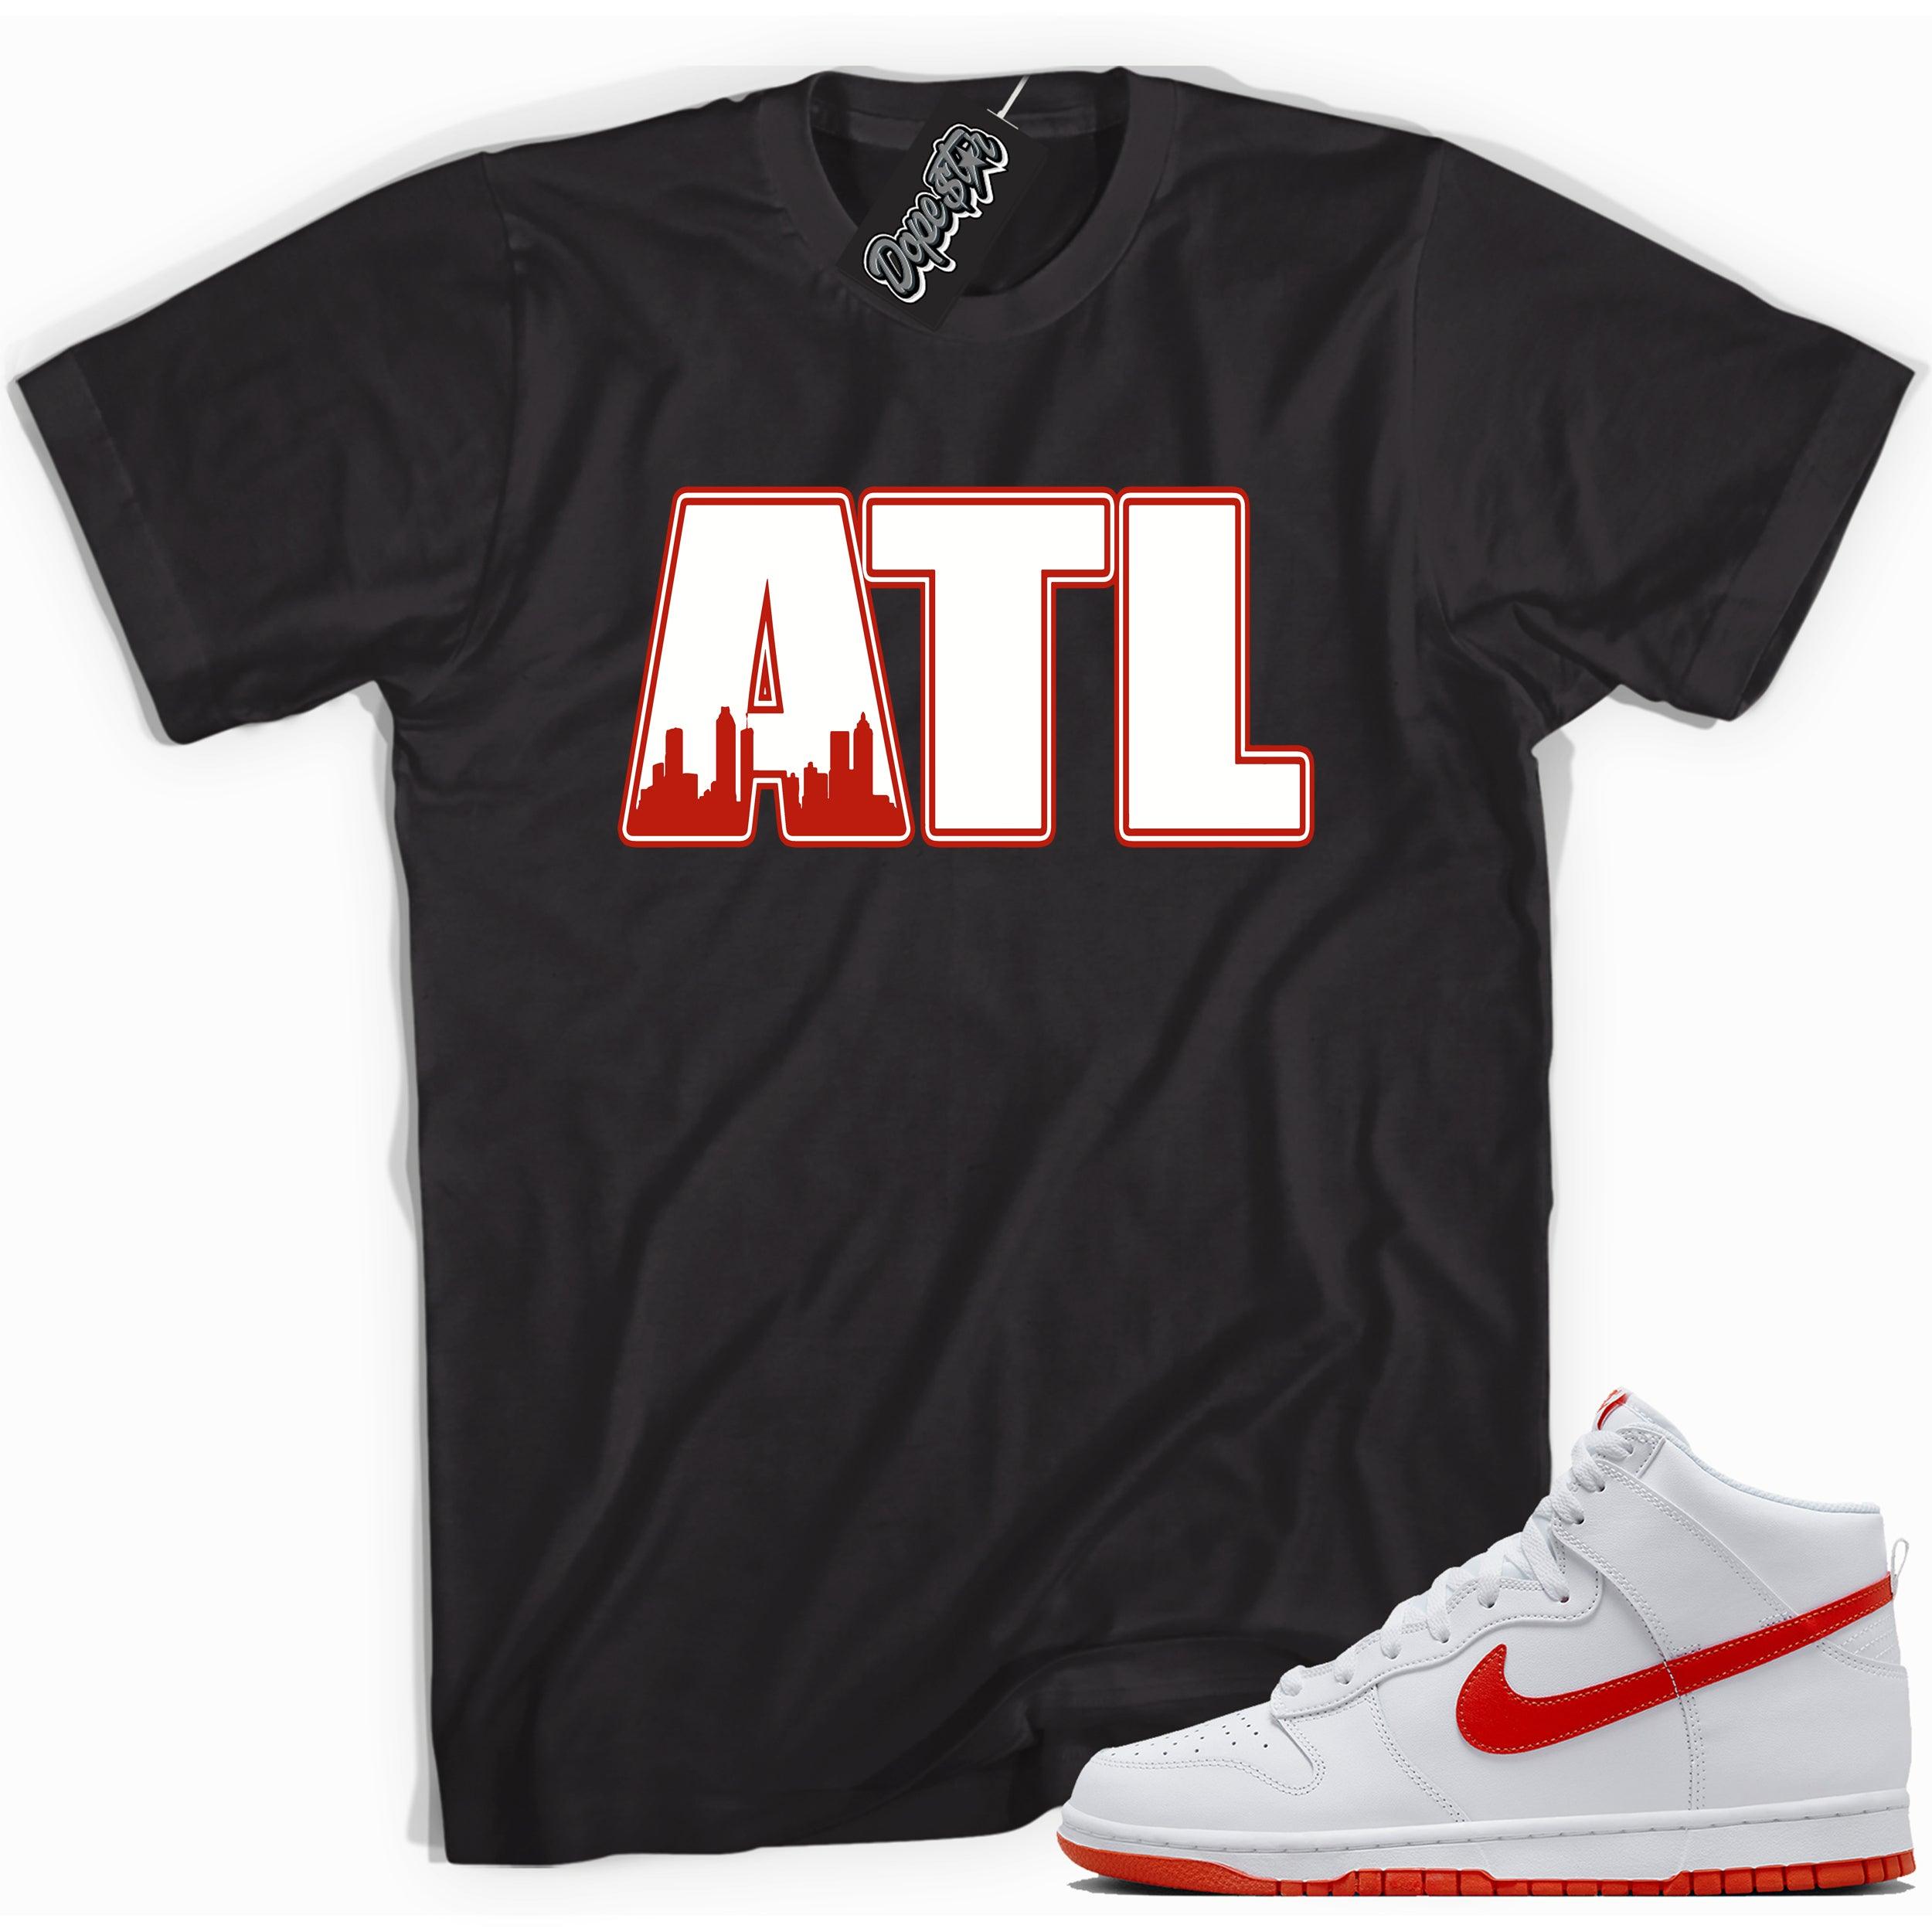 Cool black graphic tee with 'atl atlanta' print, that perfectly matches Nike Dunk High White Picante Red sneakers.